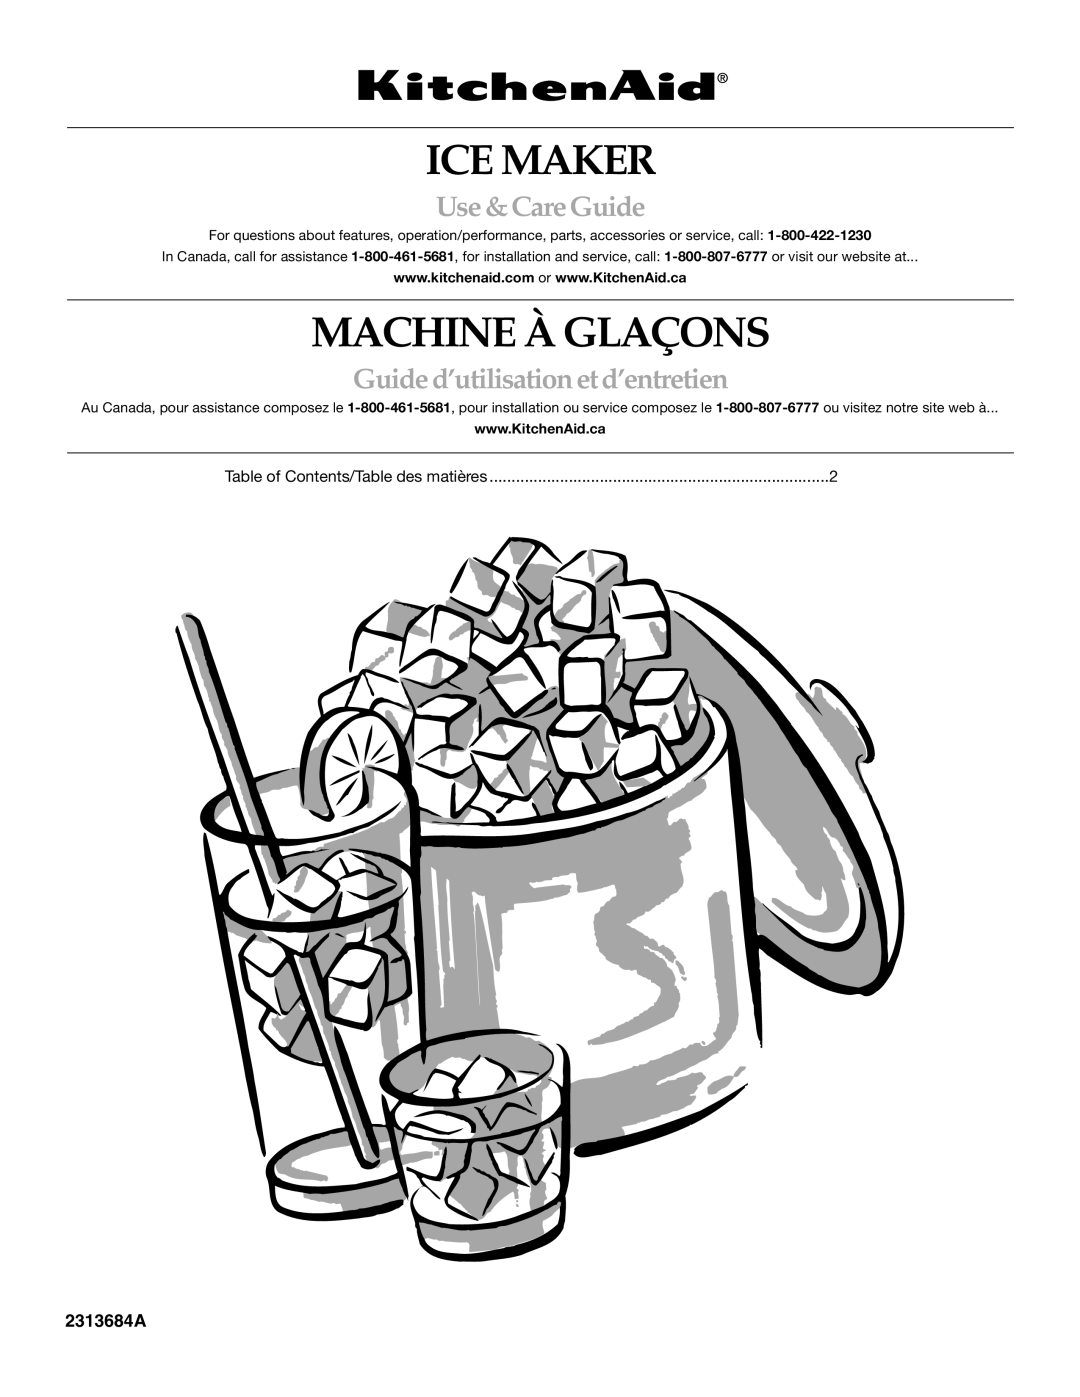 KitchenAid 2313684A manual ICE Maker, Table of Contents/Table des matières 